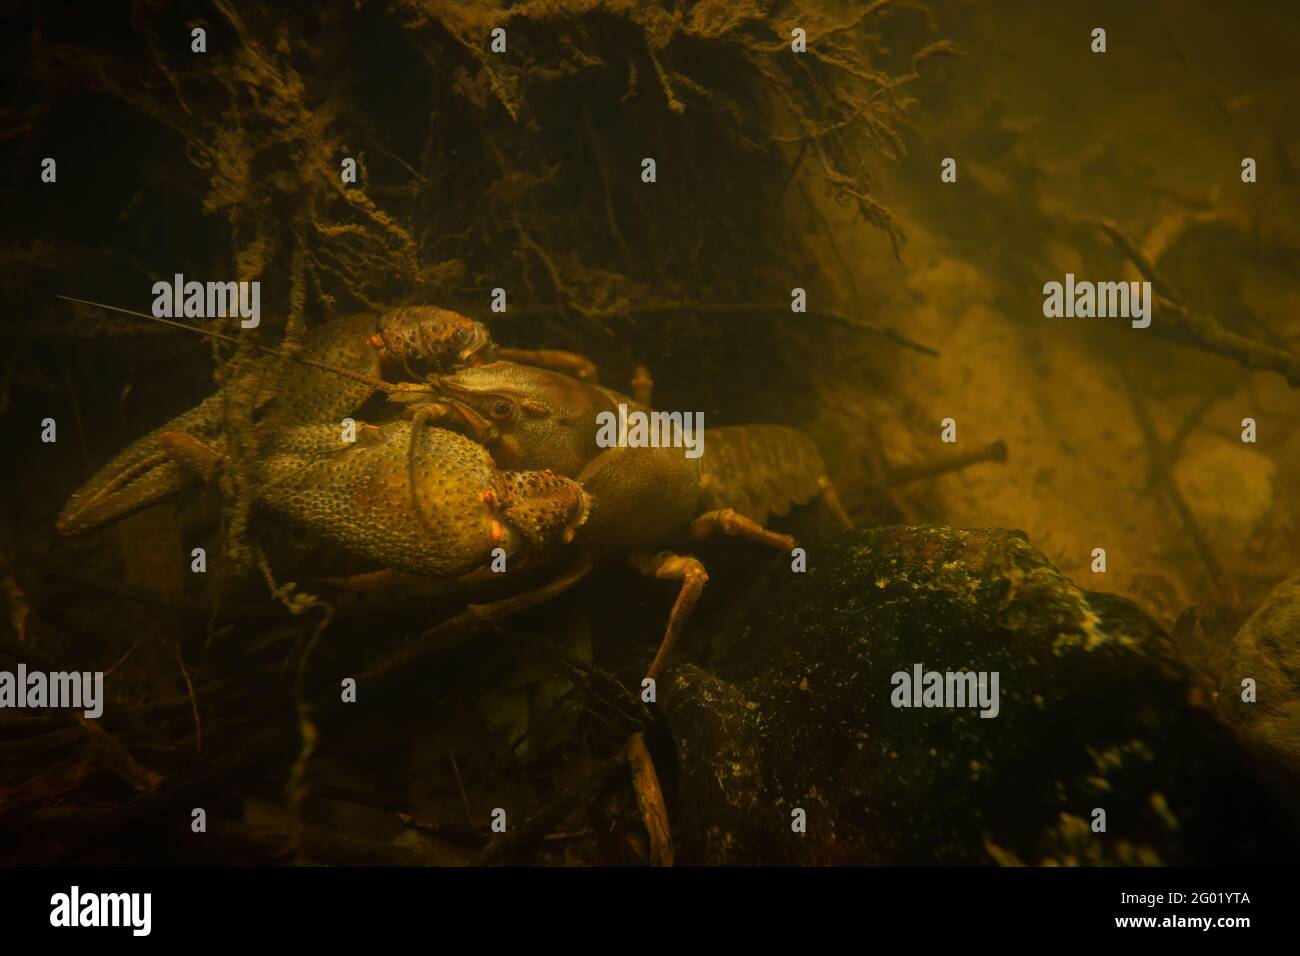 Endangered broad-fingered crayfish with big claws underwater on rock in stream Stock Photo